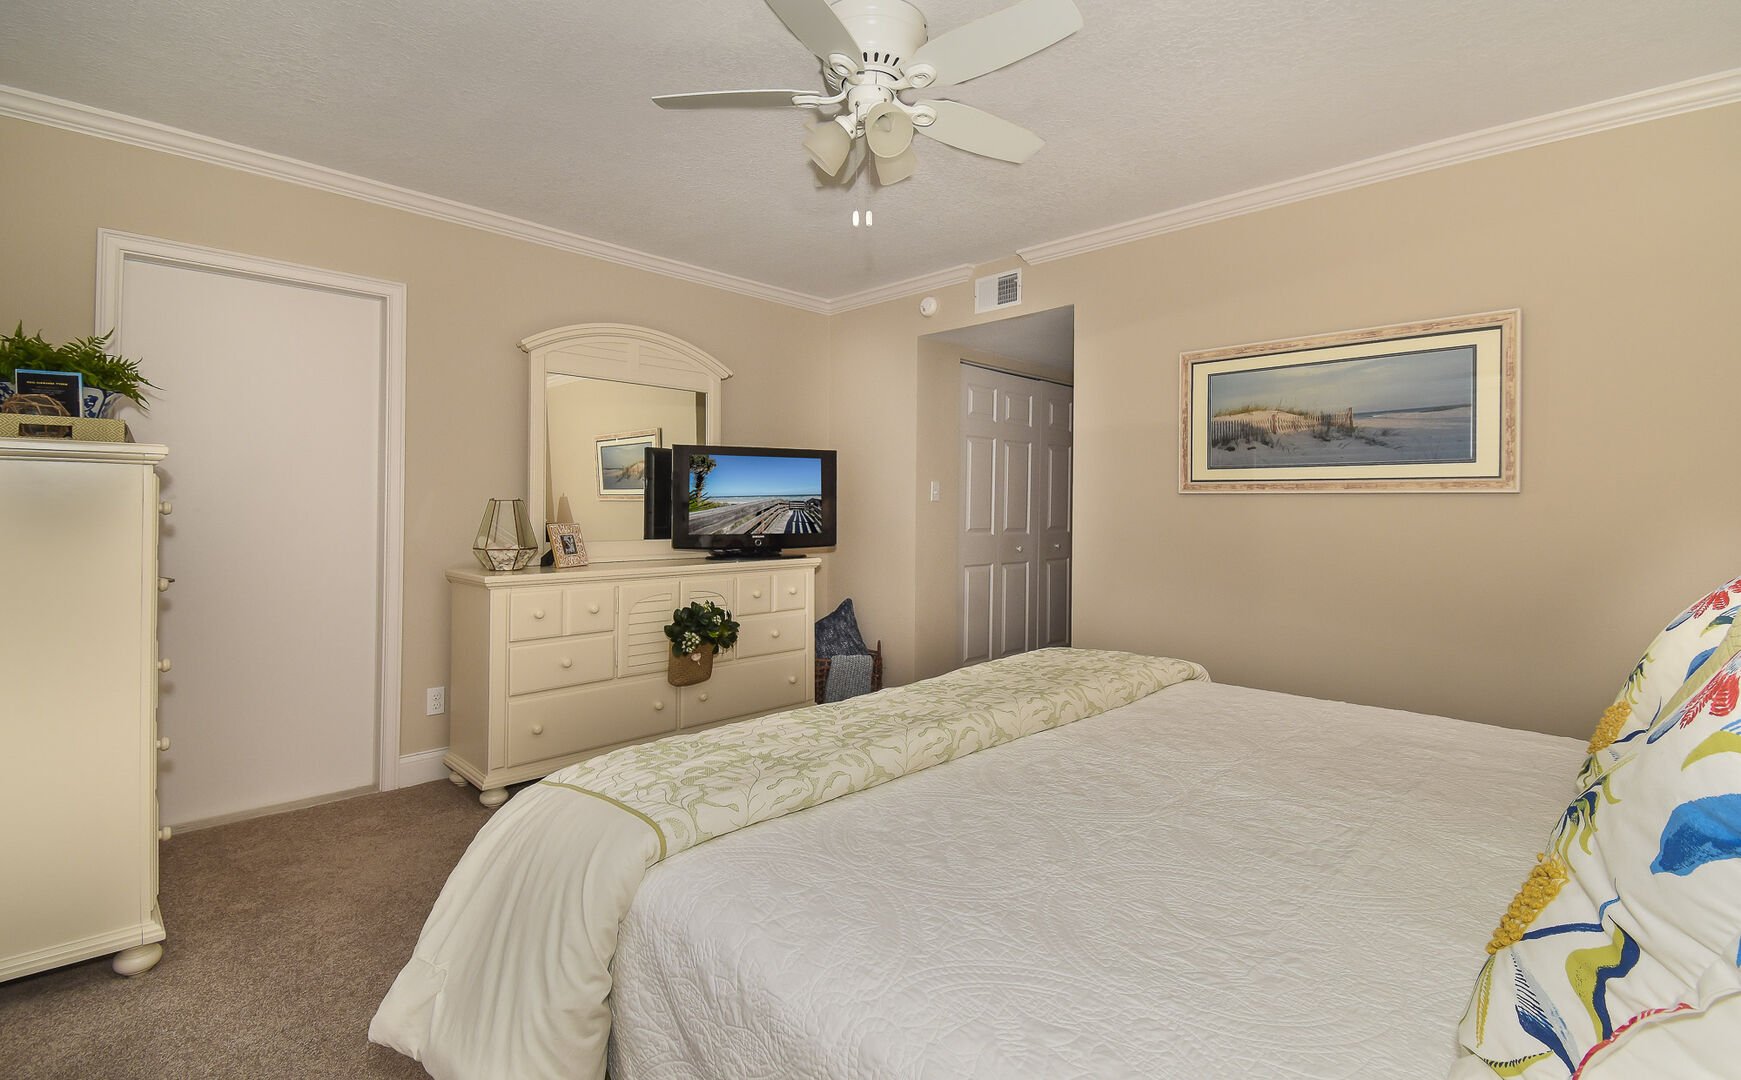 Bedroom with large bed, smart TV, ceiling fan, and dresser